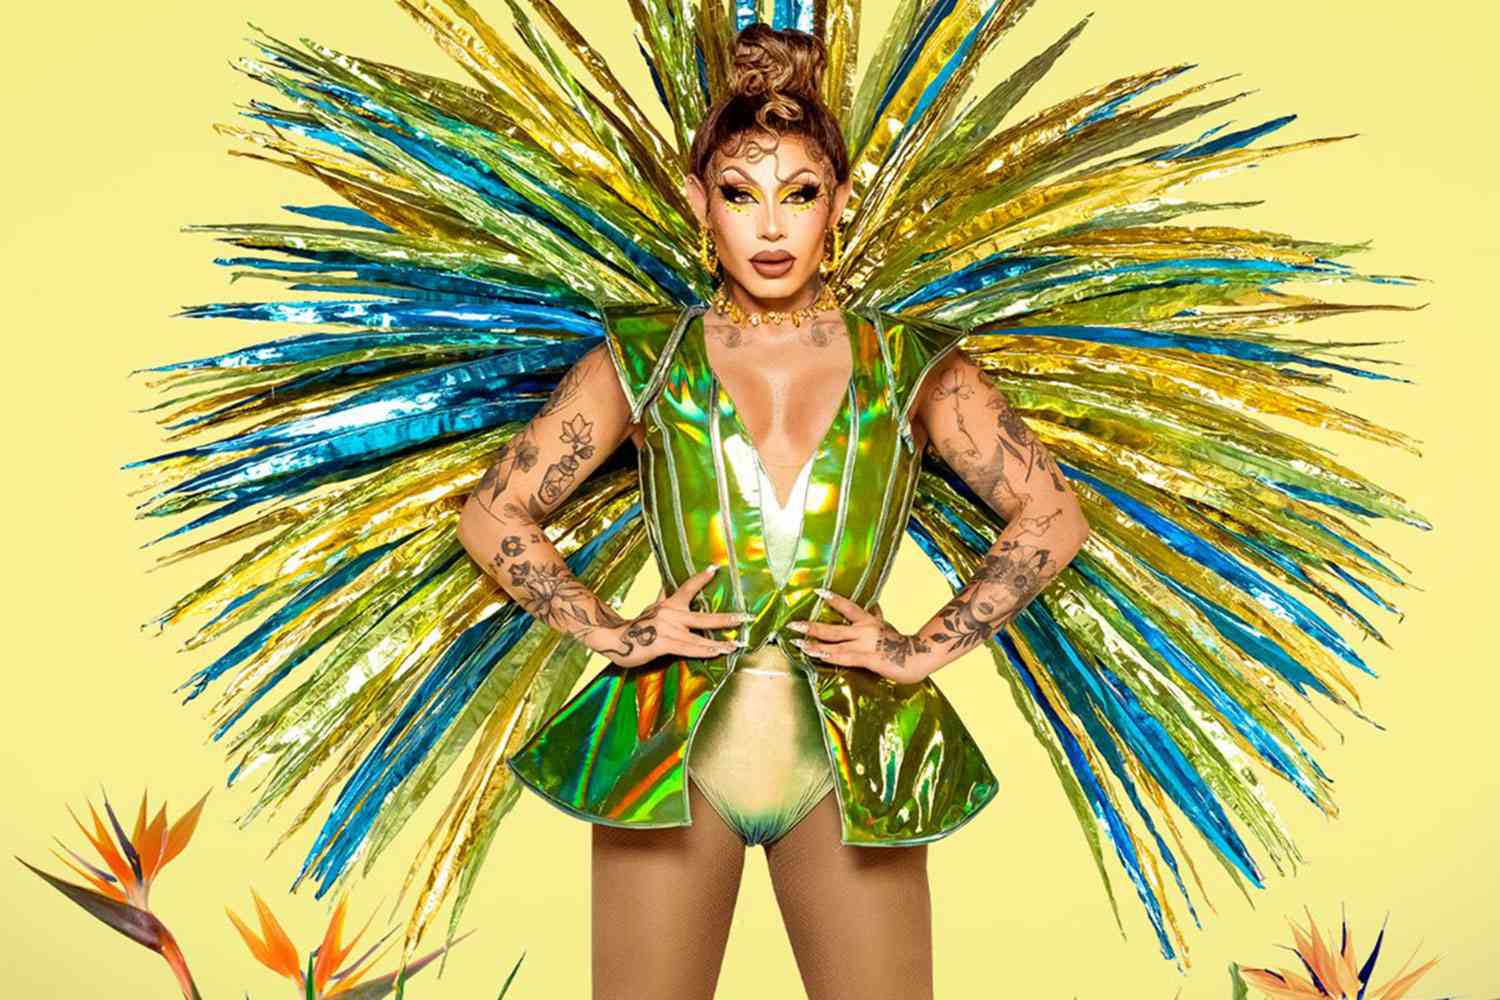 Grag Queen announced as host of 'Drag Race Brasil' Courtesy of World of Wonder (WOW), MTV and Paramount+